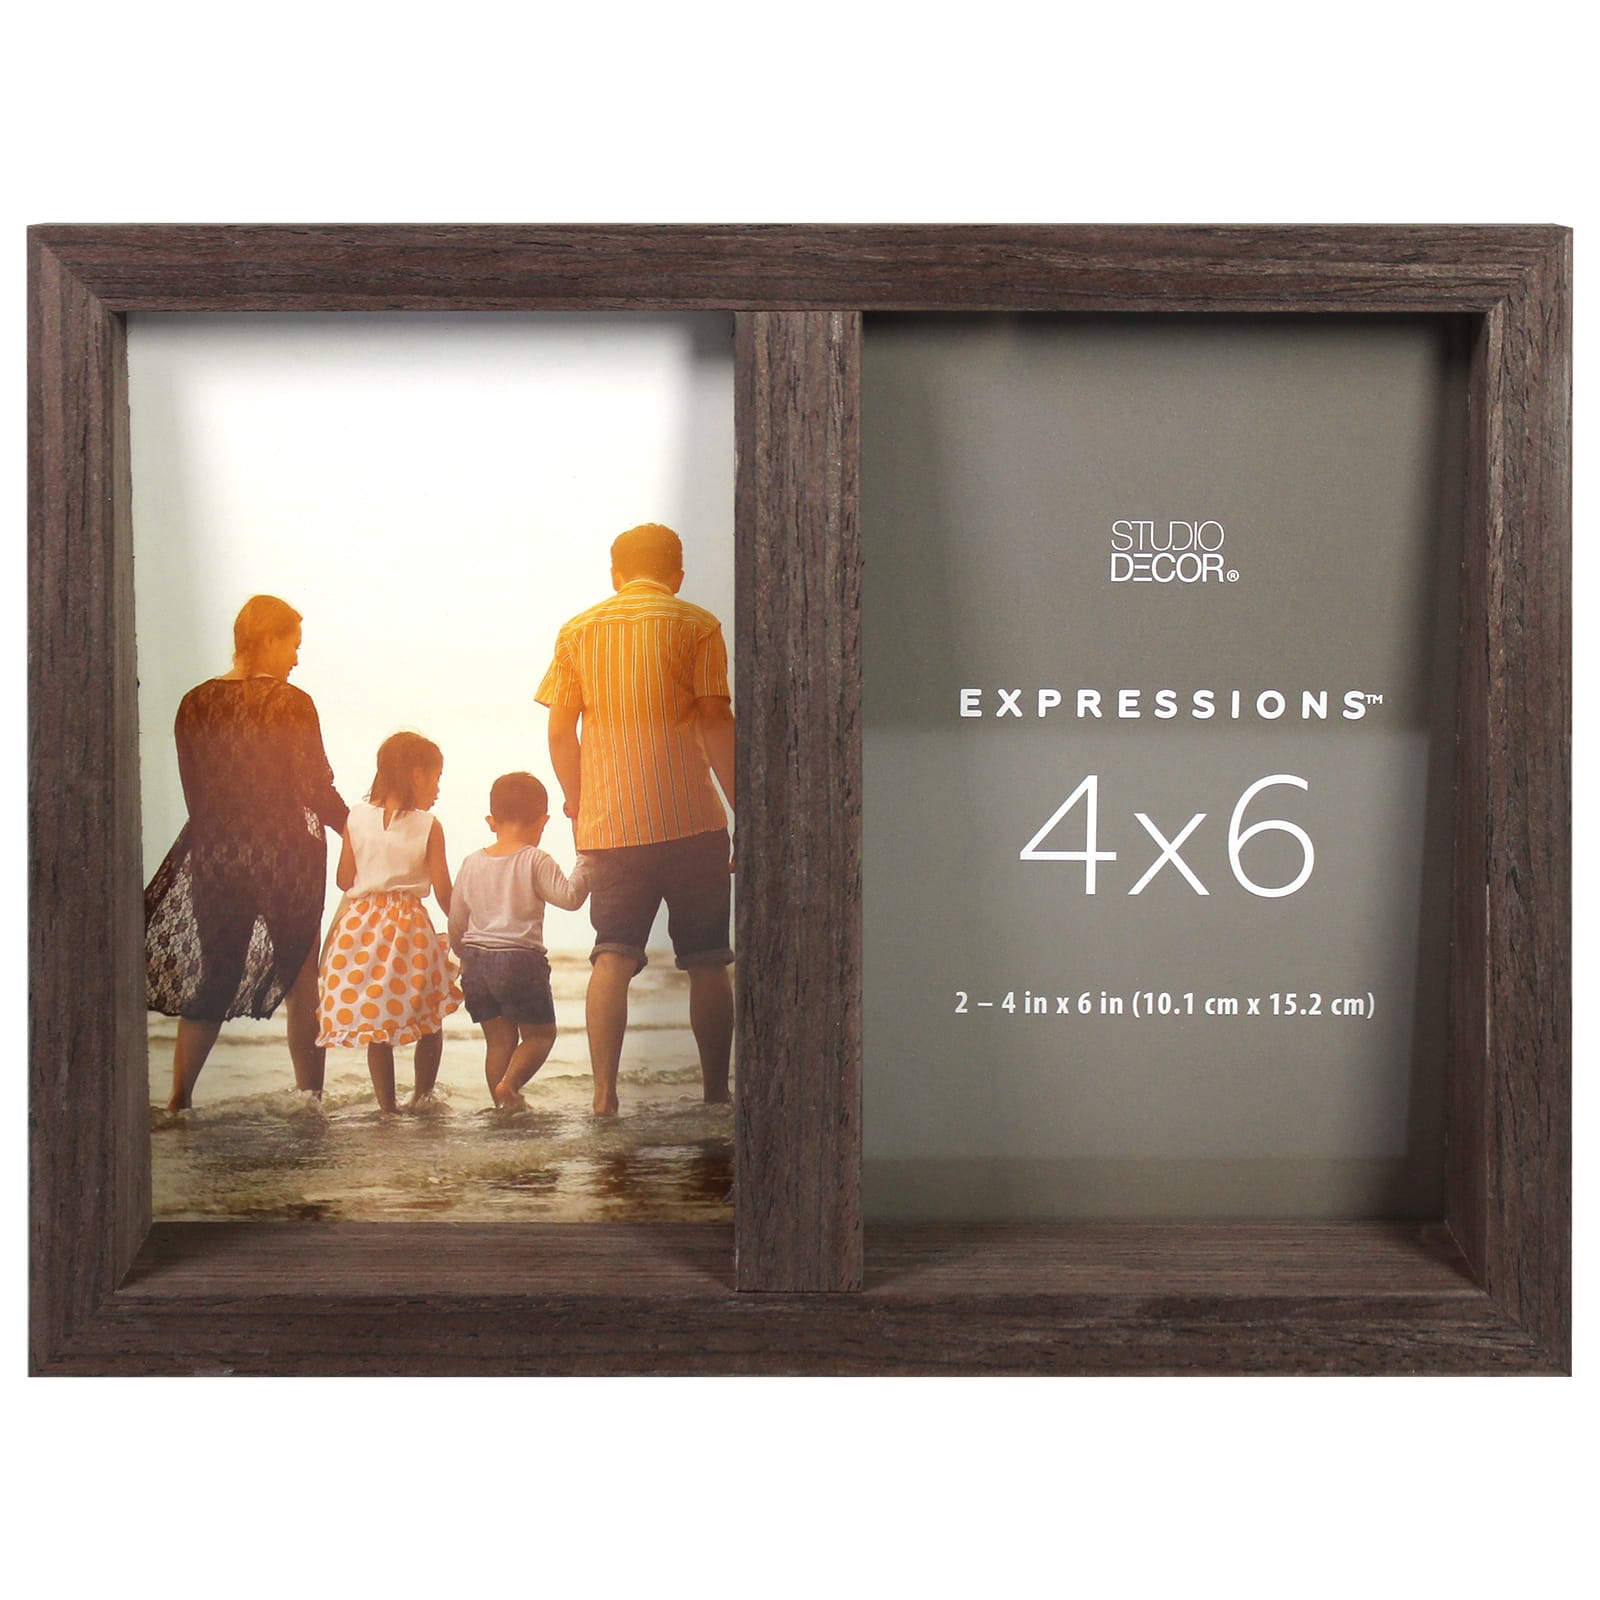 4x6 Picture Frames, 4x6 Frame, Fun, Bright, Colorful 4x6 Photo